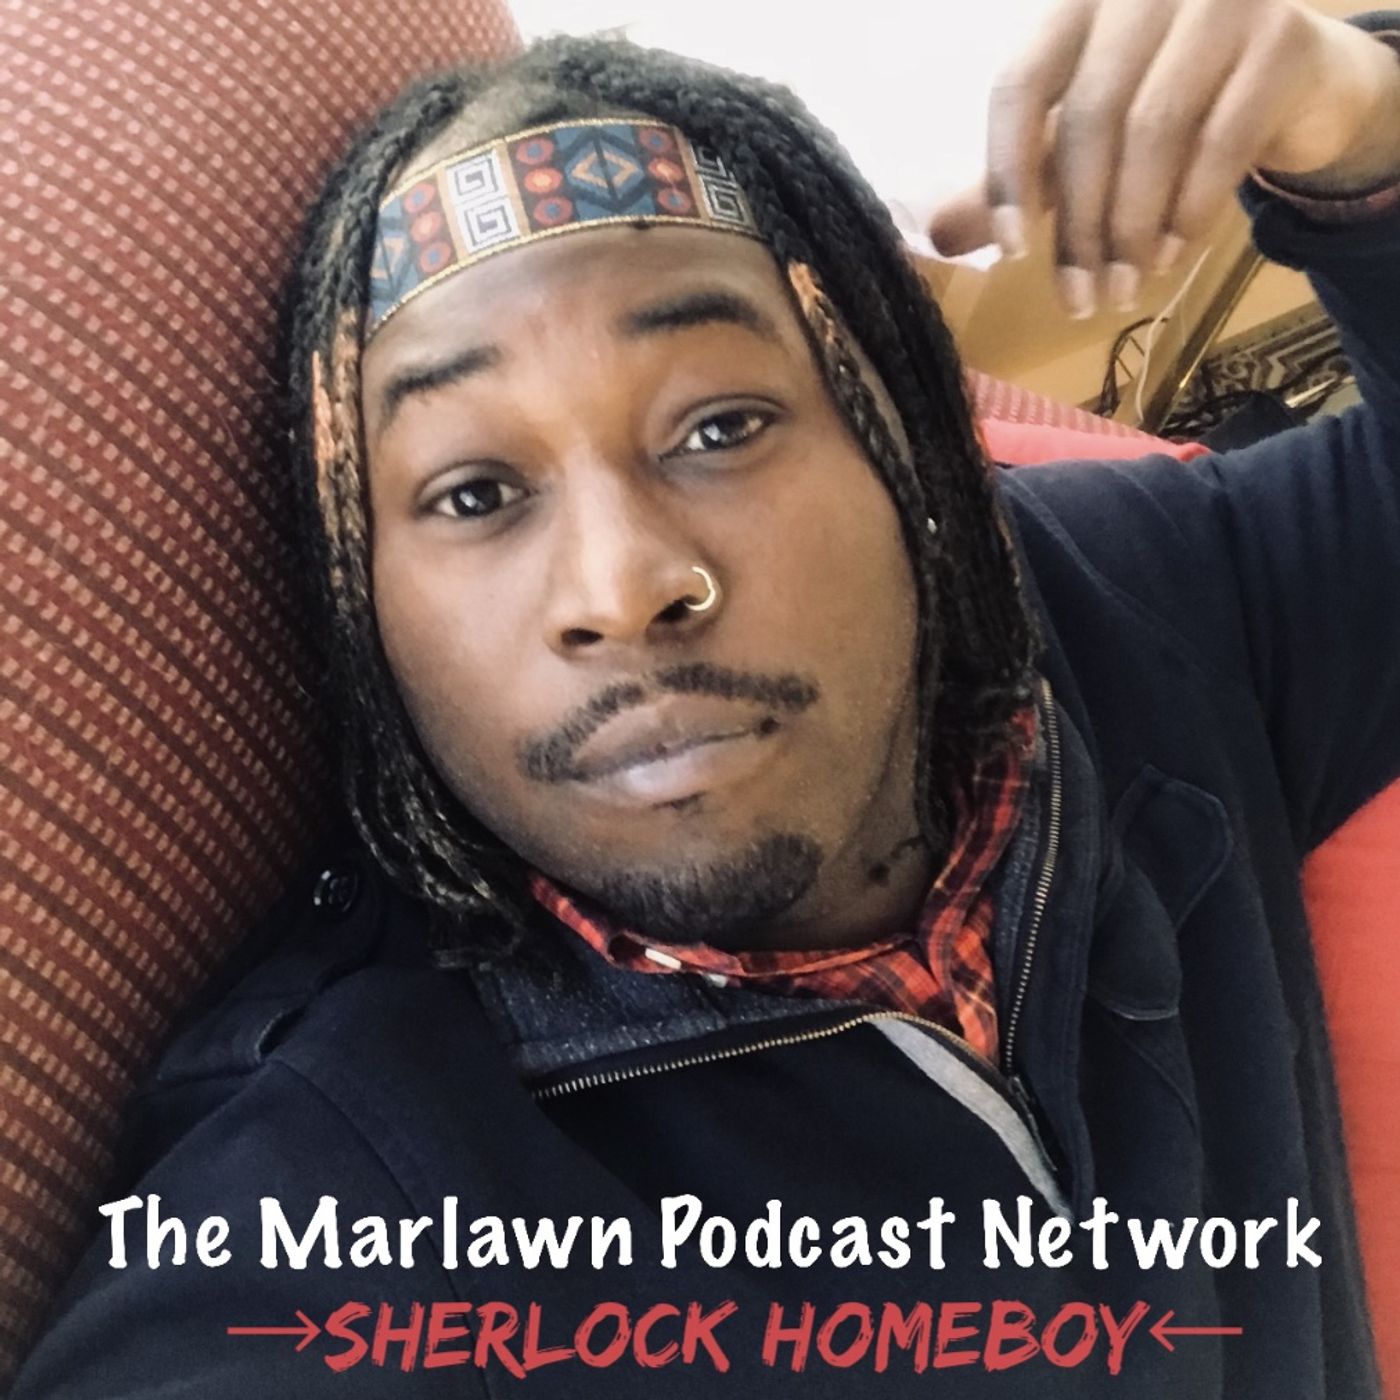 The Marlawn Podcast Network